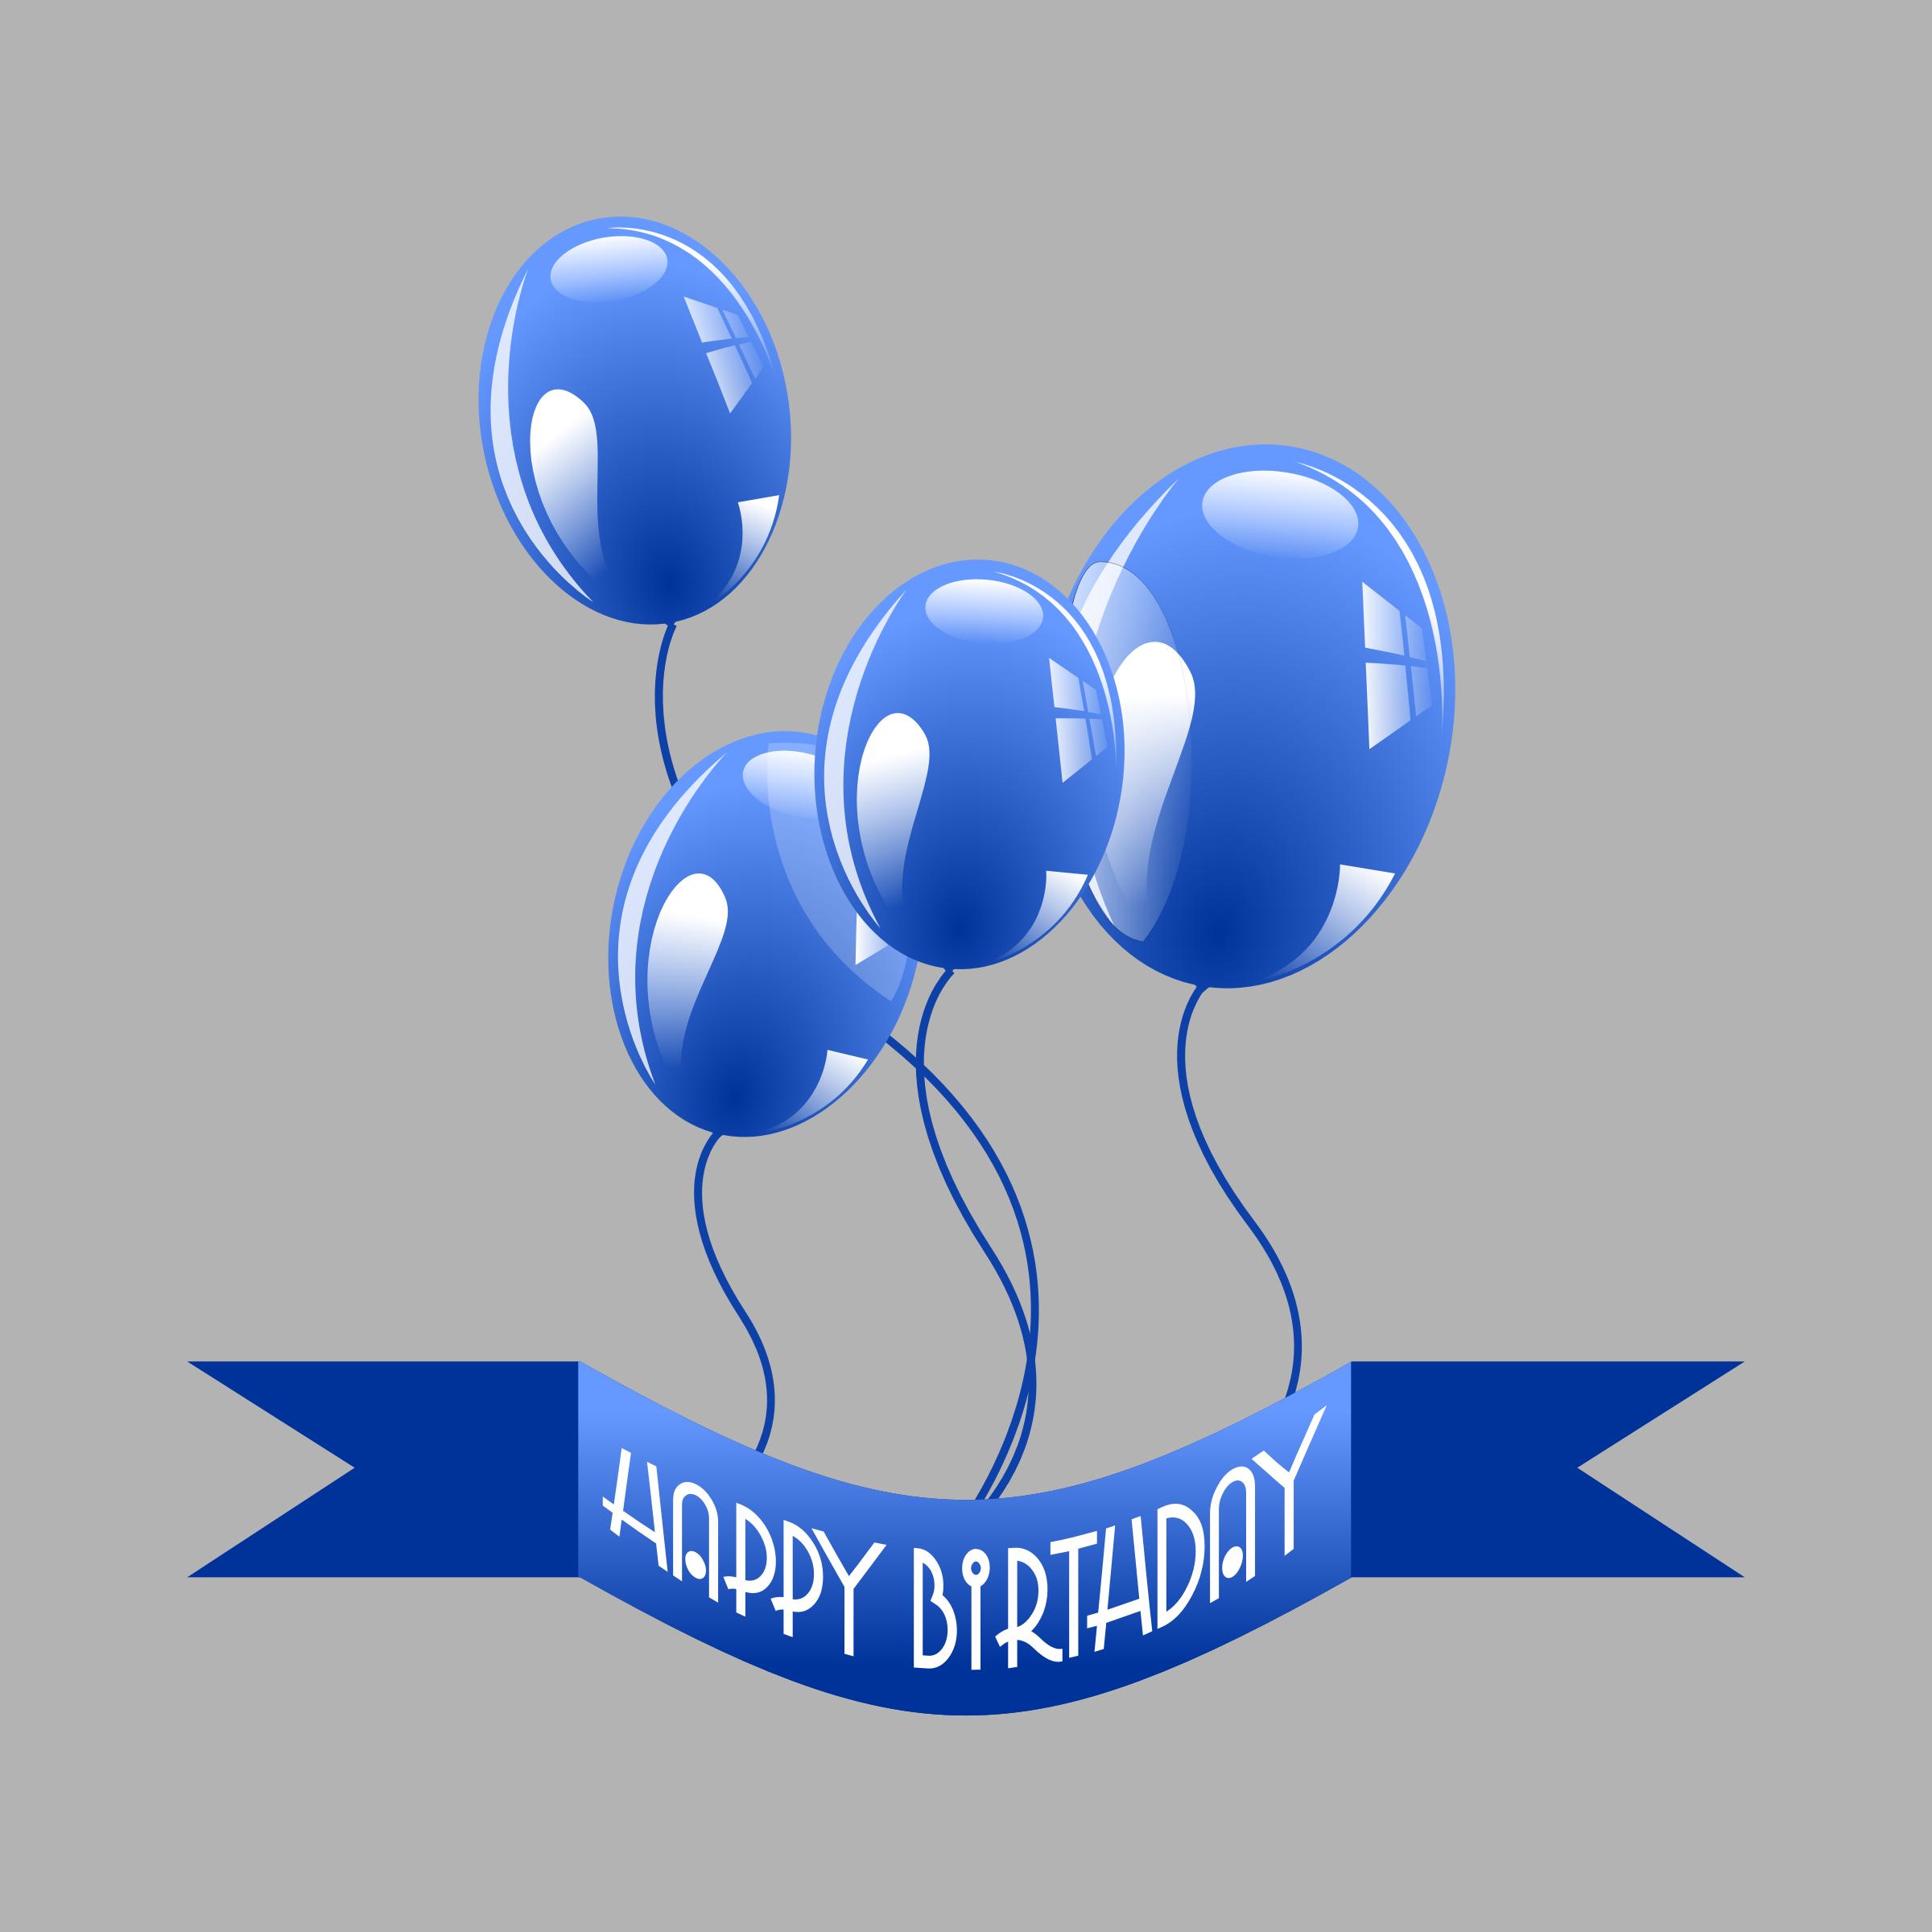 Birthday Celebration With Balloons PNG icons